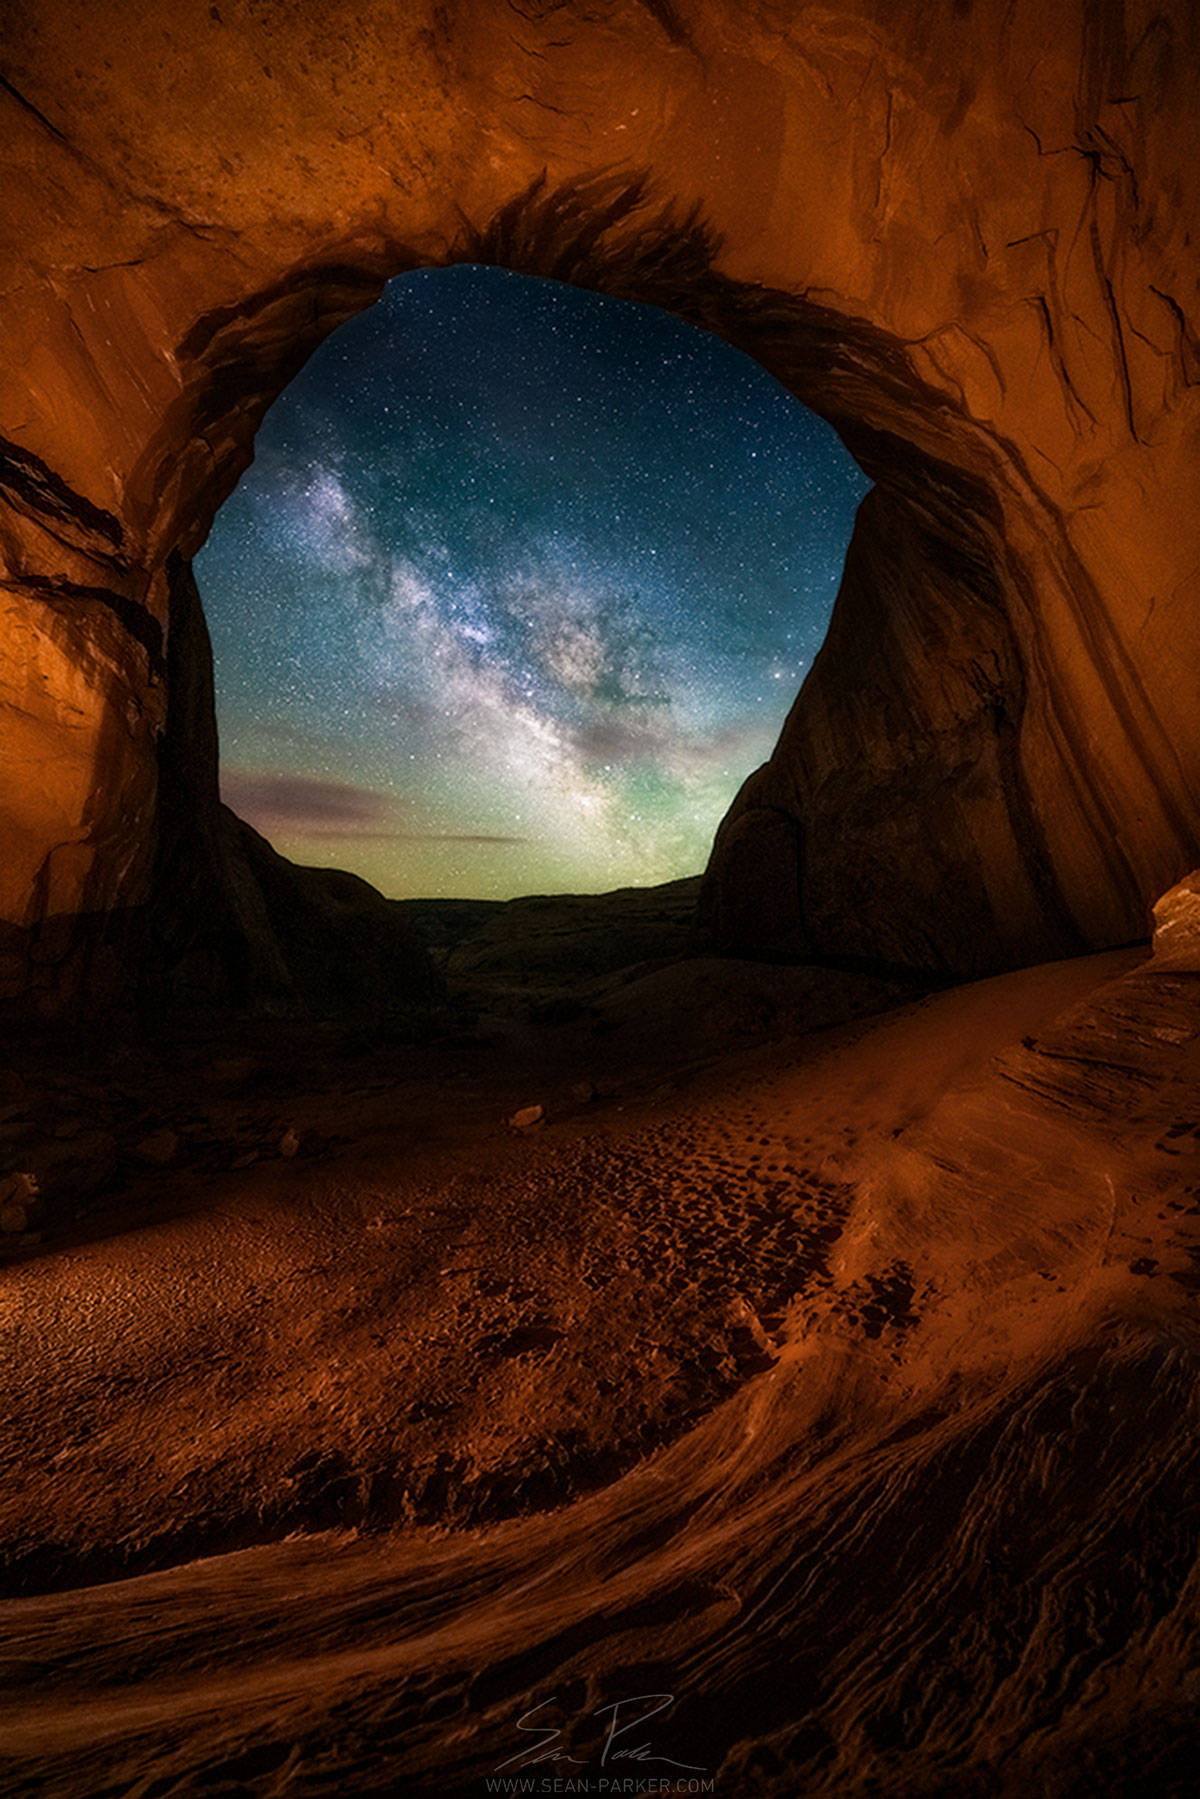 MV Cave Window night sky photography by Sean Parker